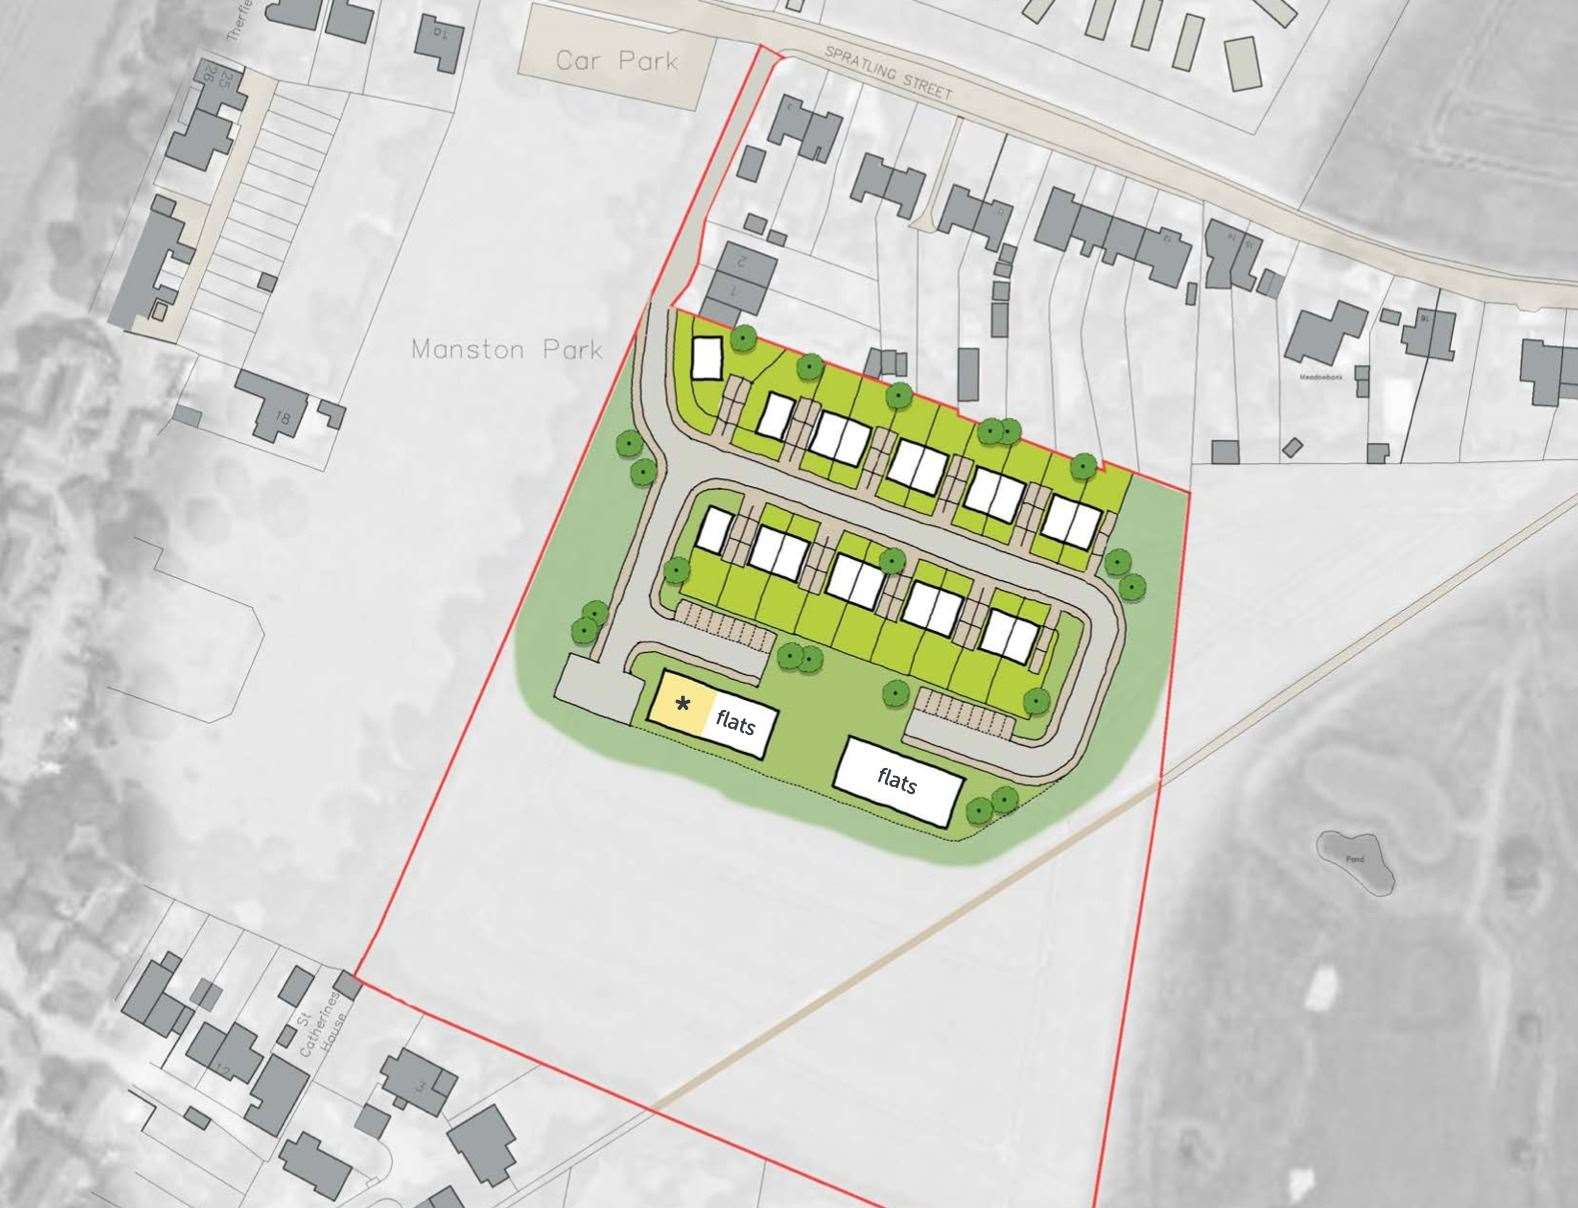 The first option at The Leys in Manston would see 19 houses and up to 16 flats be erected on the site